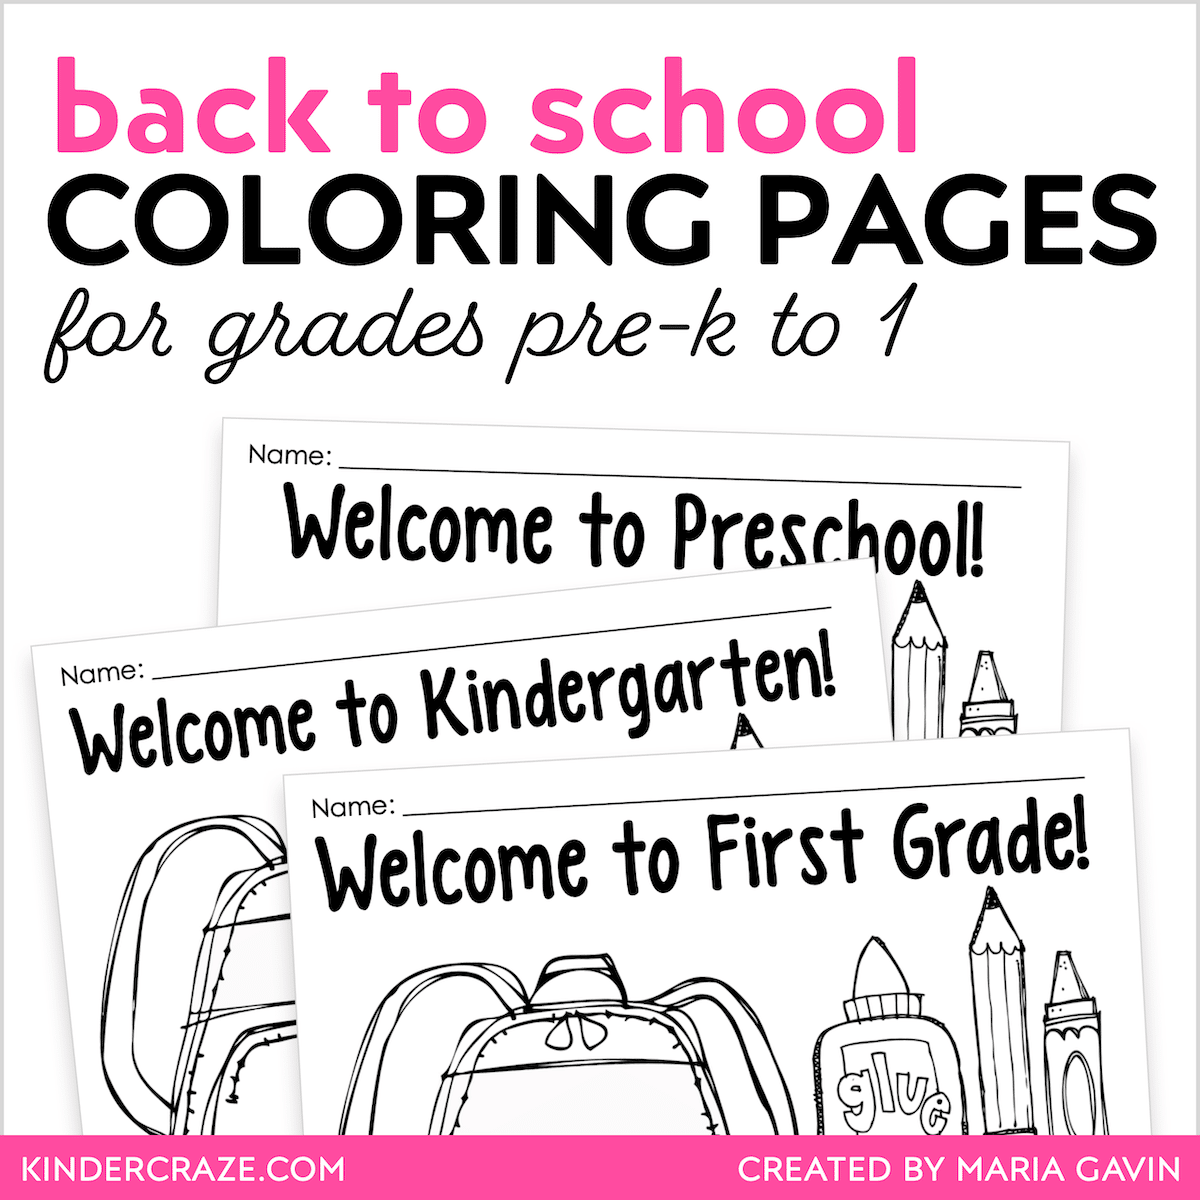 Back to school coloring pages square cover with border